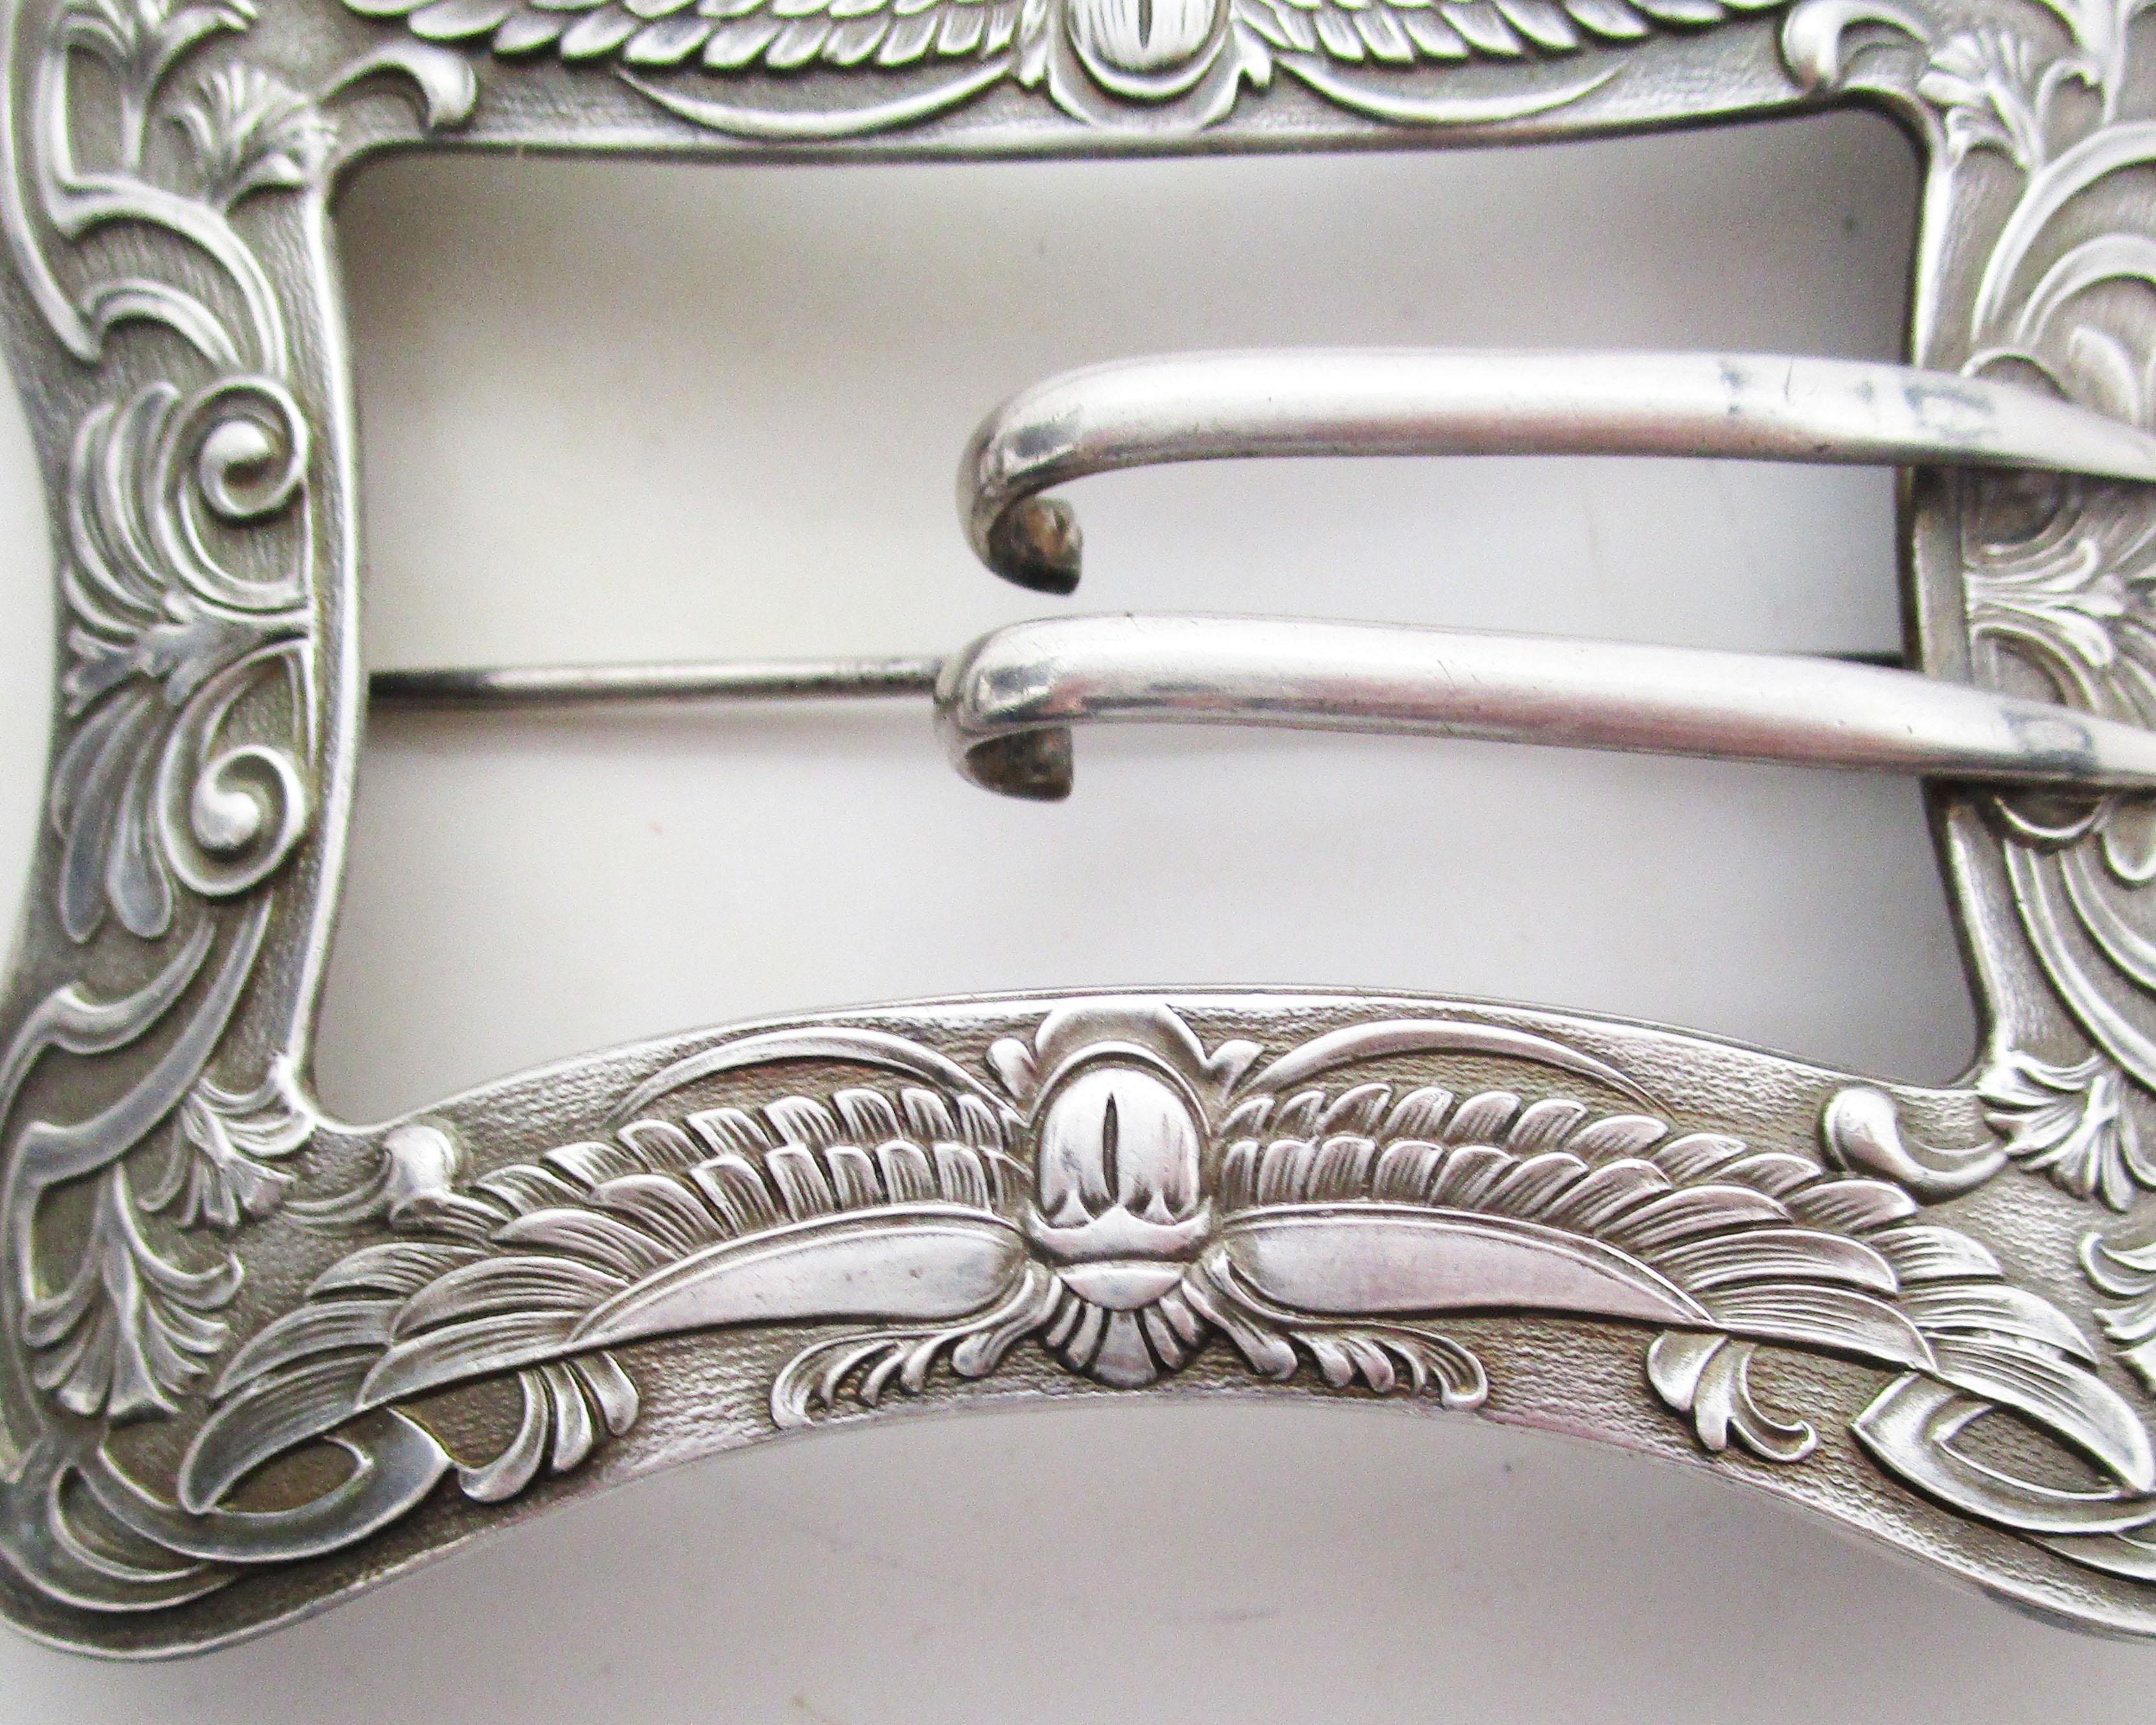 This fantastic Art Nouveau 1st Egyptian Revival style belt buckle brooch is by the Unger Brothers in sterling silver. The dramatic large scale of the brooch is enough to make it a statement piece, but what makes it truly remarkable is the incredible